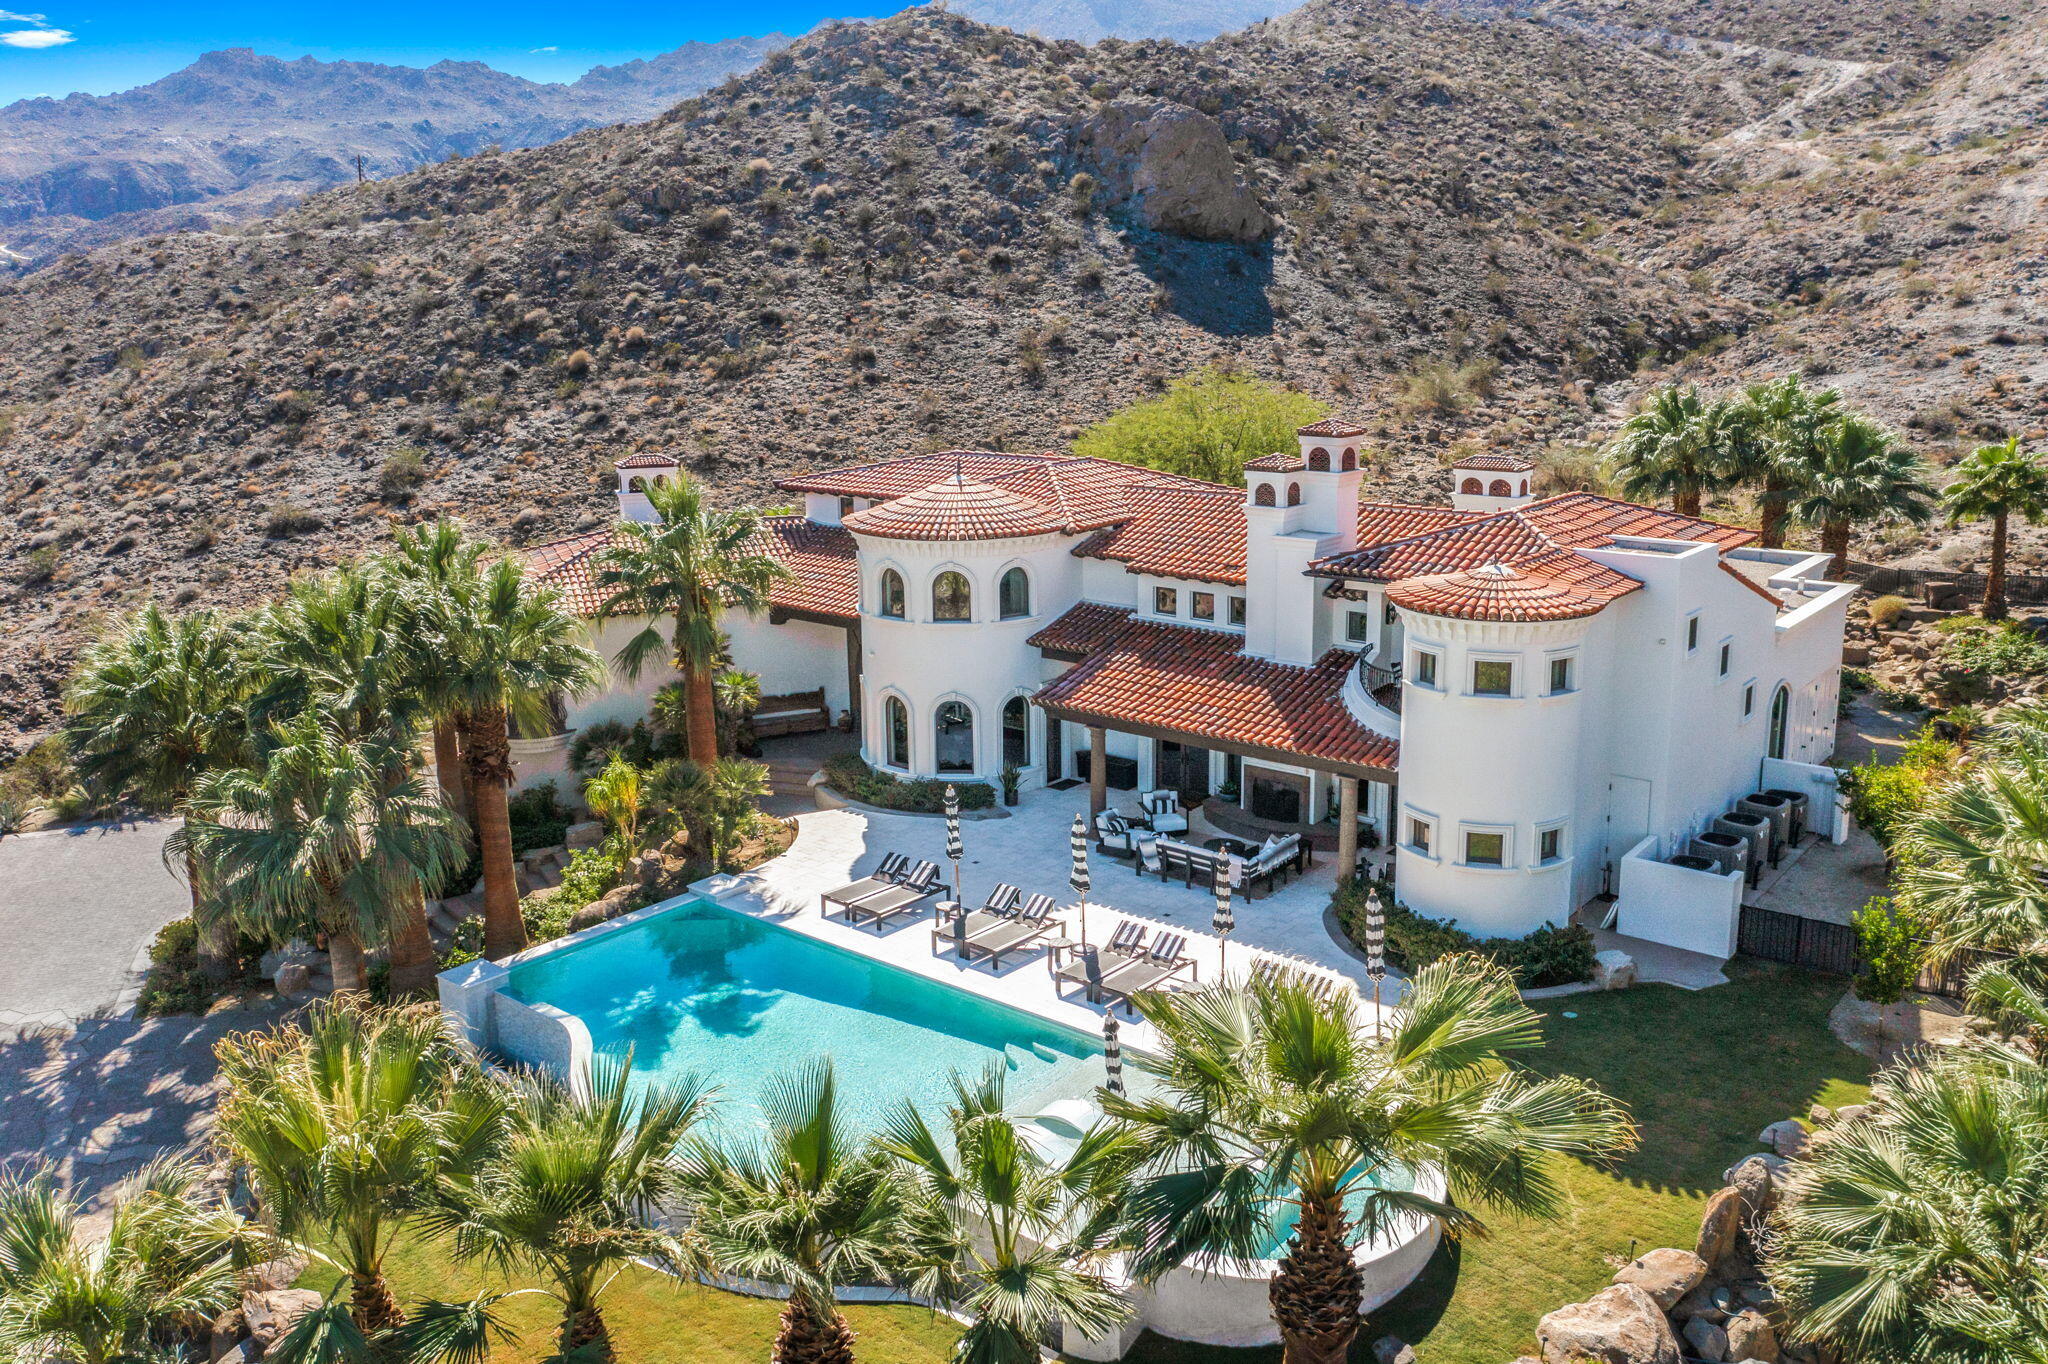 This breathtaking estate located in the South Palm Desert neighborhood of Cahuilla Hills offers dramatic panoramic views of the mountains, golf courses and down valley that are stunning day and night! Enter the secluded estate through the private gate, as you meander up the extended drive of the 2.39 acres set high up on the hillside you arrive at the spectacular 6,254 sq ft custom built estate. Walking up the dramatic entry staircase your eyes will be on overload as you see over 1,600 square feet of covered patios and balconies that surround the brand new huge infinity pool and extra large spa which is designed to let you enjoy an amazing indoor outdoor living experience day and night. The gourmet cooks' kitchen has been remodeled and will impress with its customization and huge island. The informal and formal spaces all have direct access to the outdoor living areas and boast beautiful hand carved stone fireplaces, forged iron railings, hand hewn beam trusses and wood floors along with rare natural stones throughout. The spacious primary suite has its own fireplace, sitting area and balcony making for a very relaxing retreat. The newly remodeled bathroom area has a unique round shaped shower and large soaking tub that comes with a view. The other three en-suites are separated throughout the two story estate offering the utmost in privacy and luxury. Add in the elevator and brick walled wine cellar making this a one of a kind property that is offered furnished per inventory.